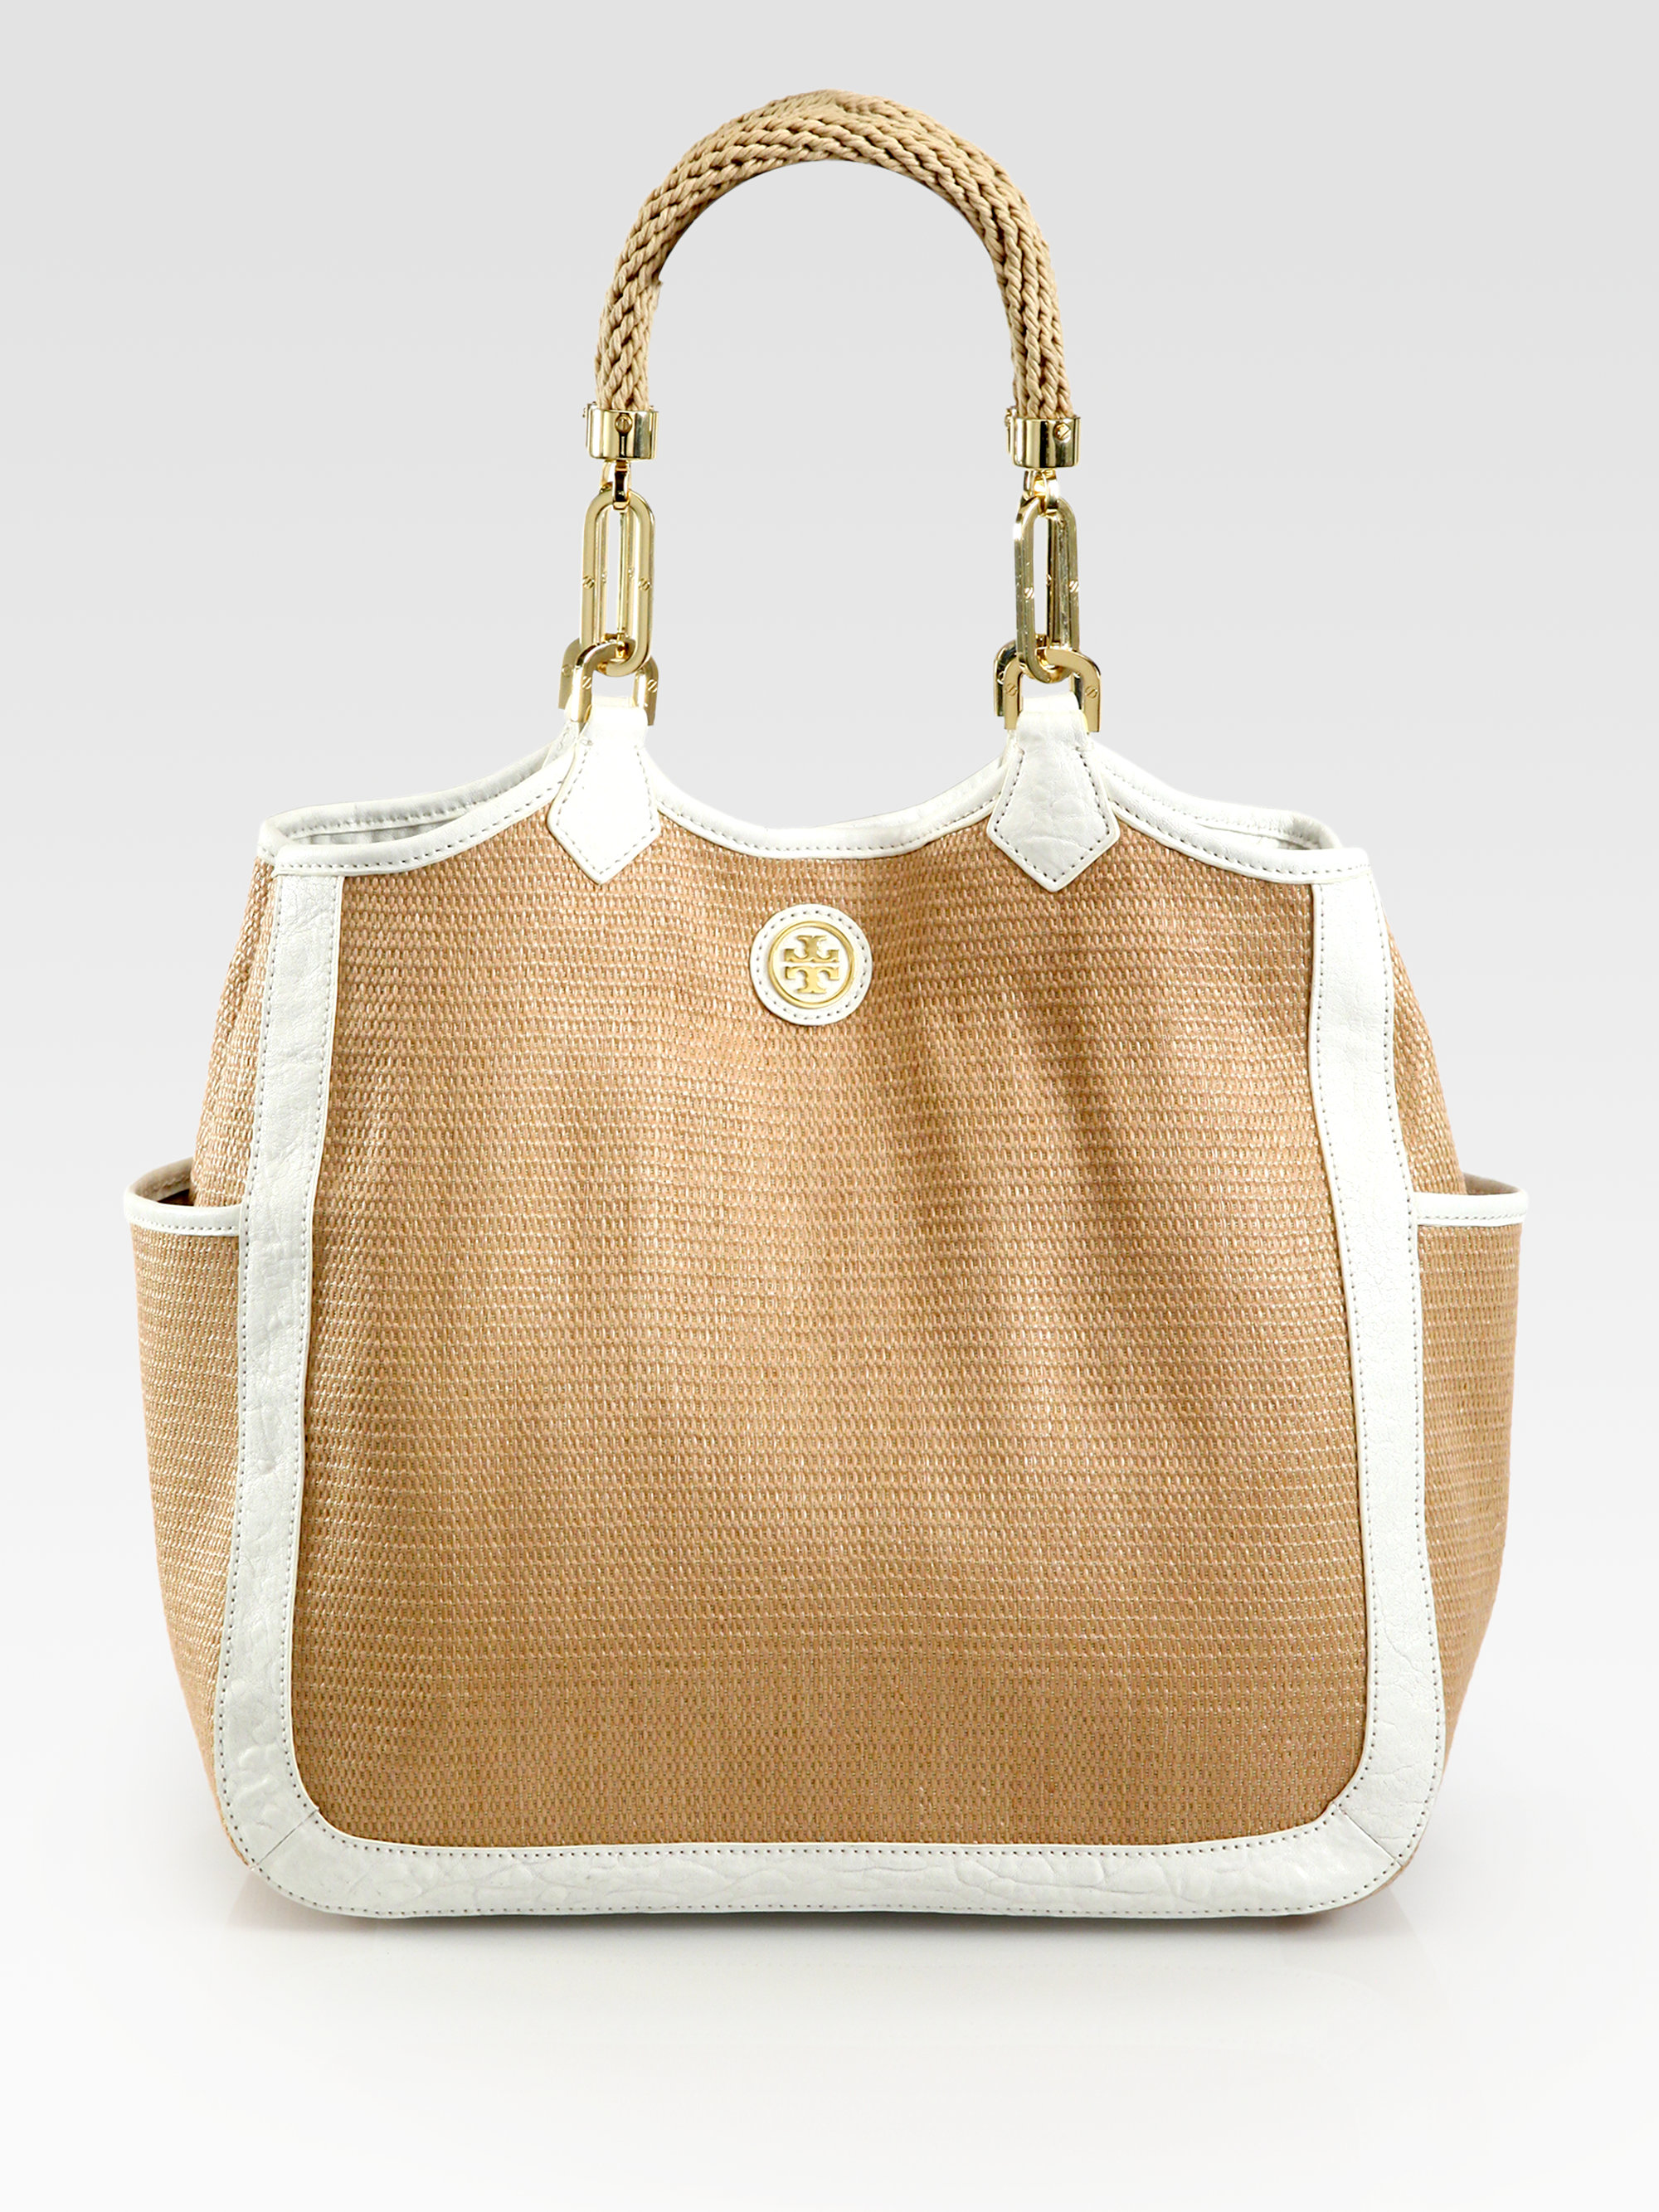 Tory Burch Channing Straw Leather Tote Bag in Natural-White (Brown) - Lyst